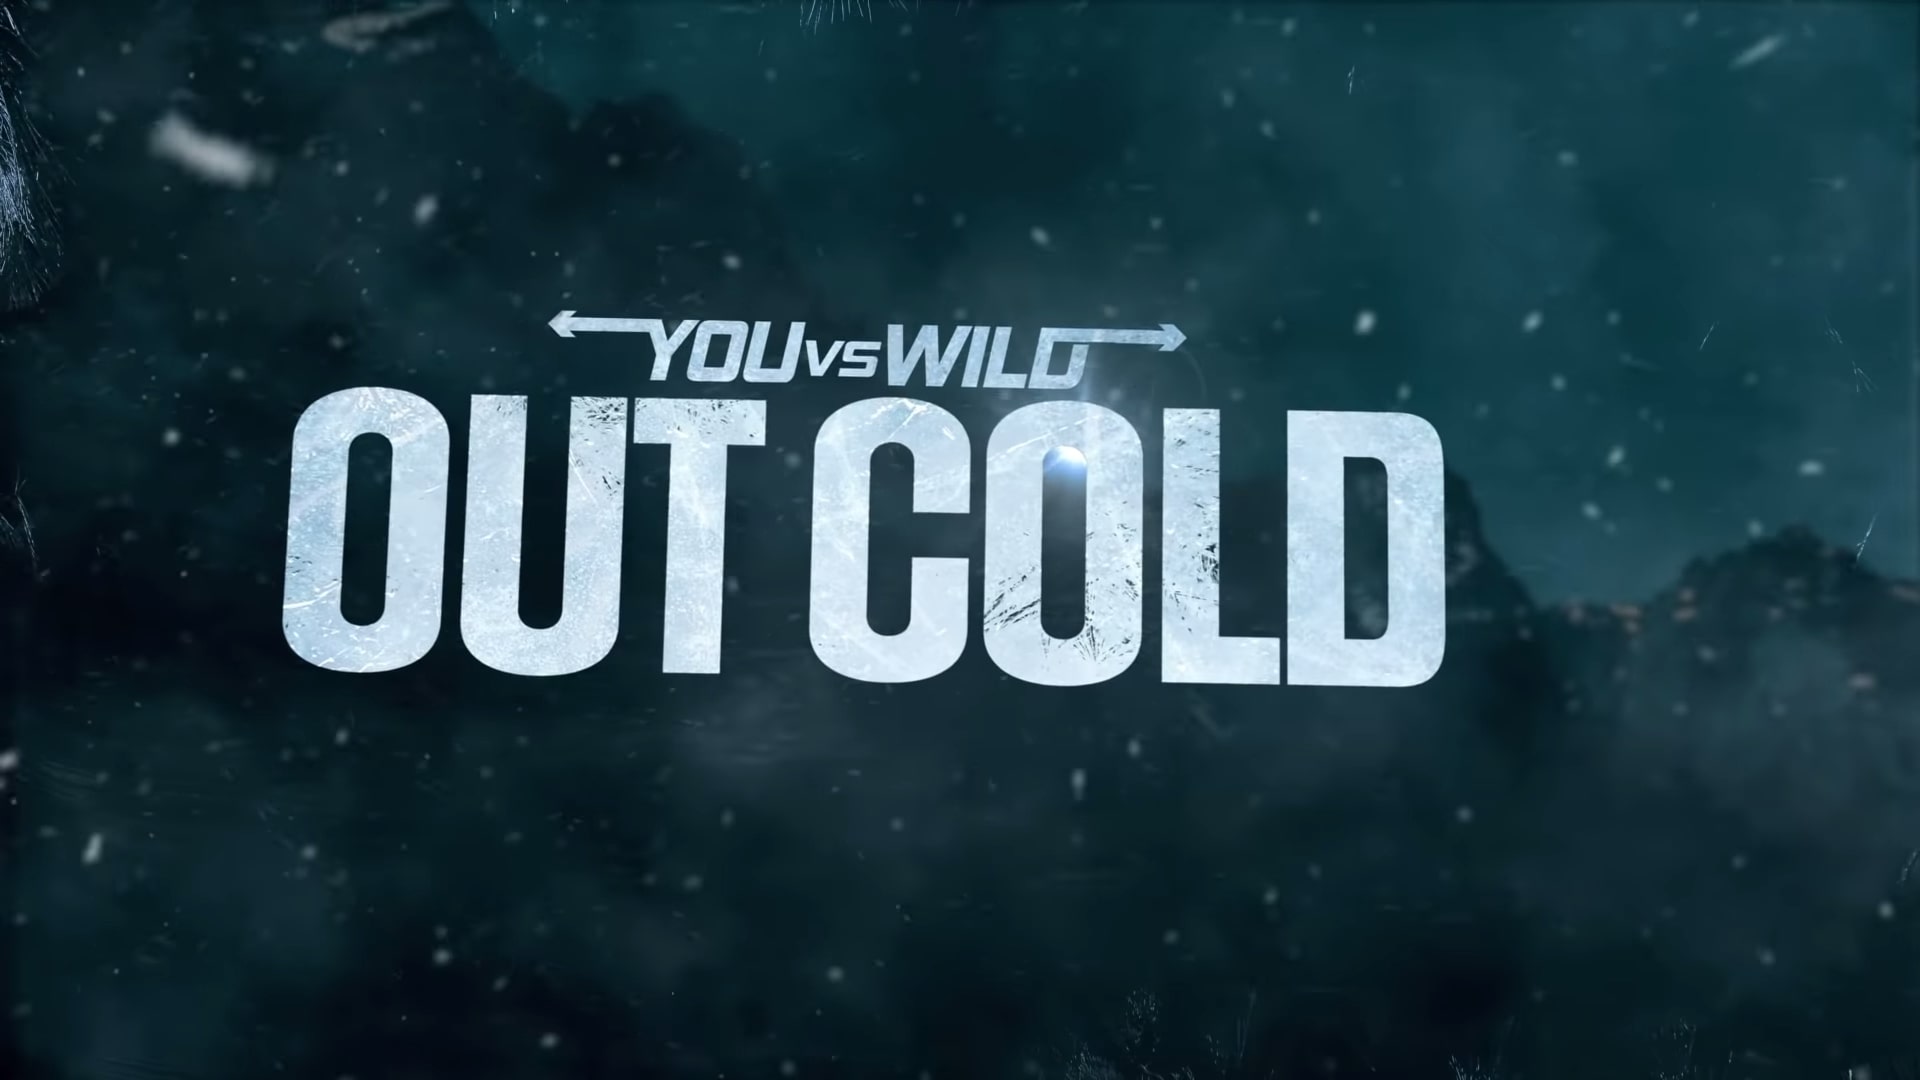 Netflix You vs Wild Out Cold Trailer, Coming to Netflix in September 2021